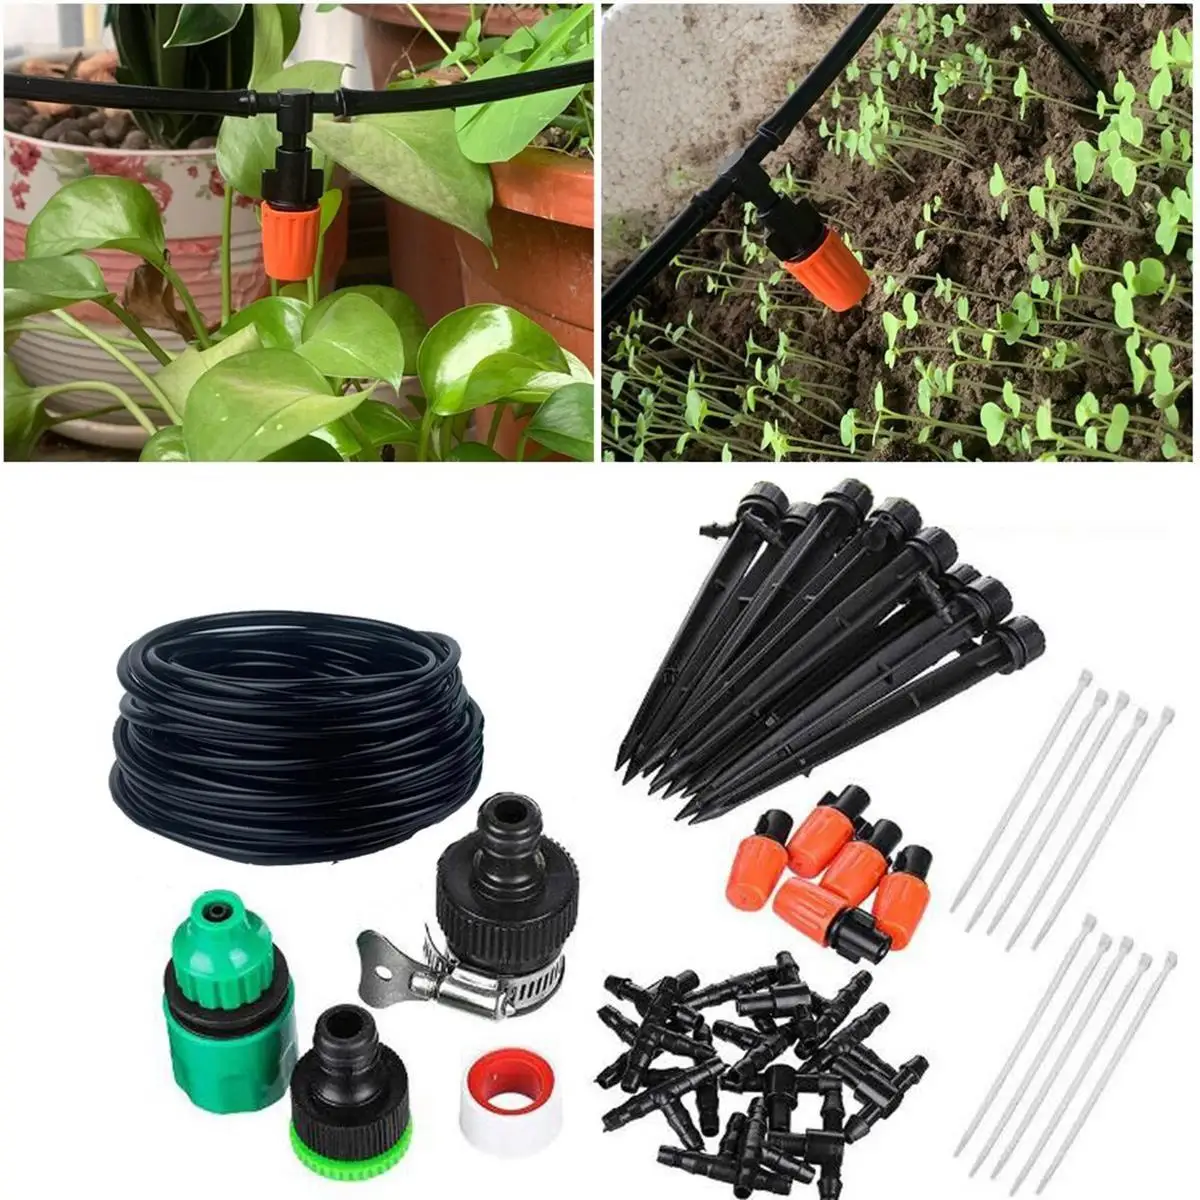 15 Meter Garden Drip Irrigation System Set Hose and Fittings